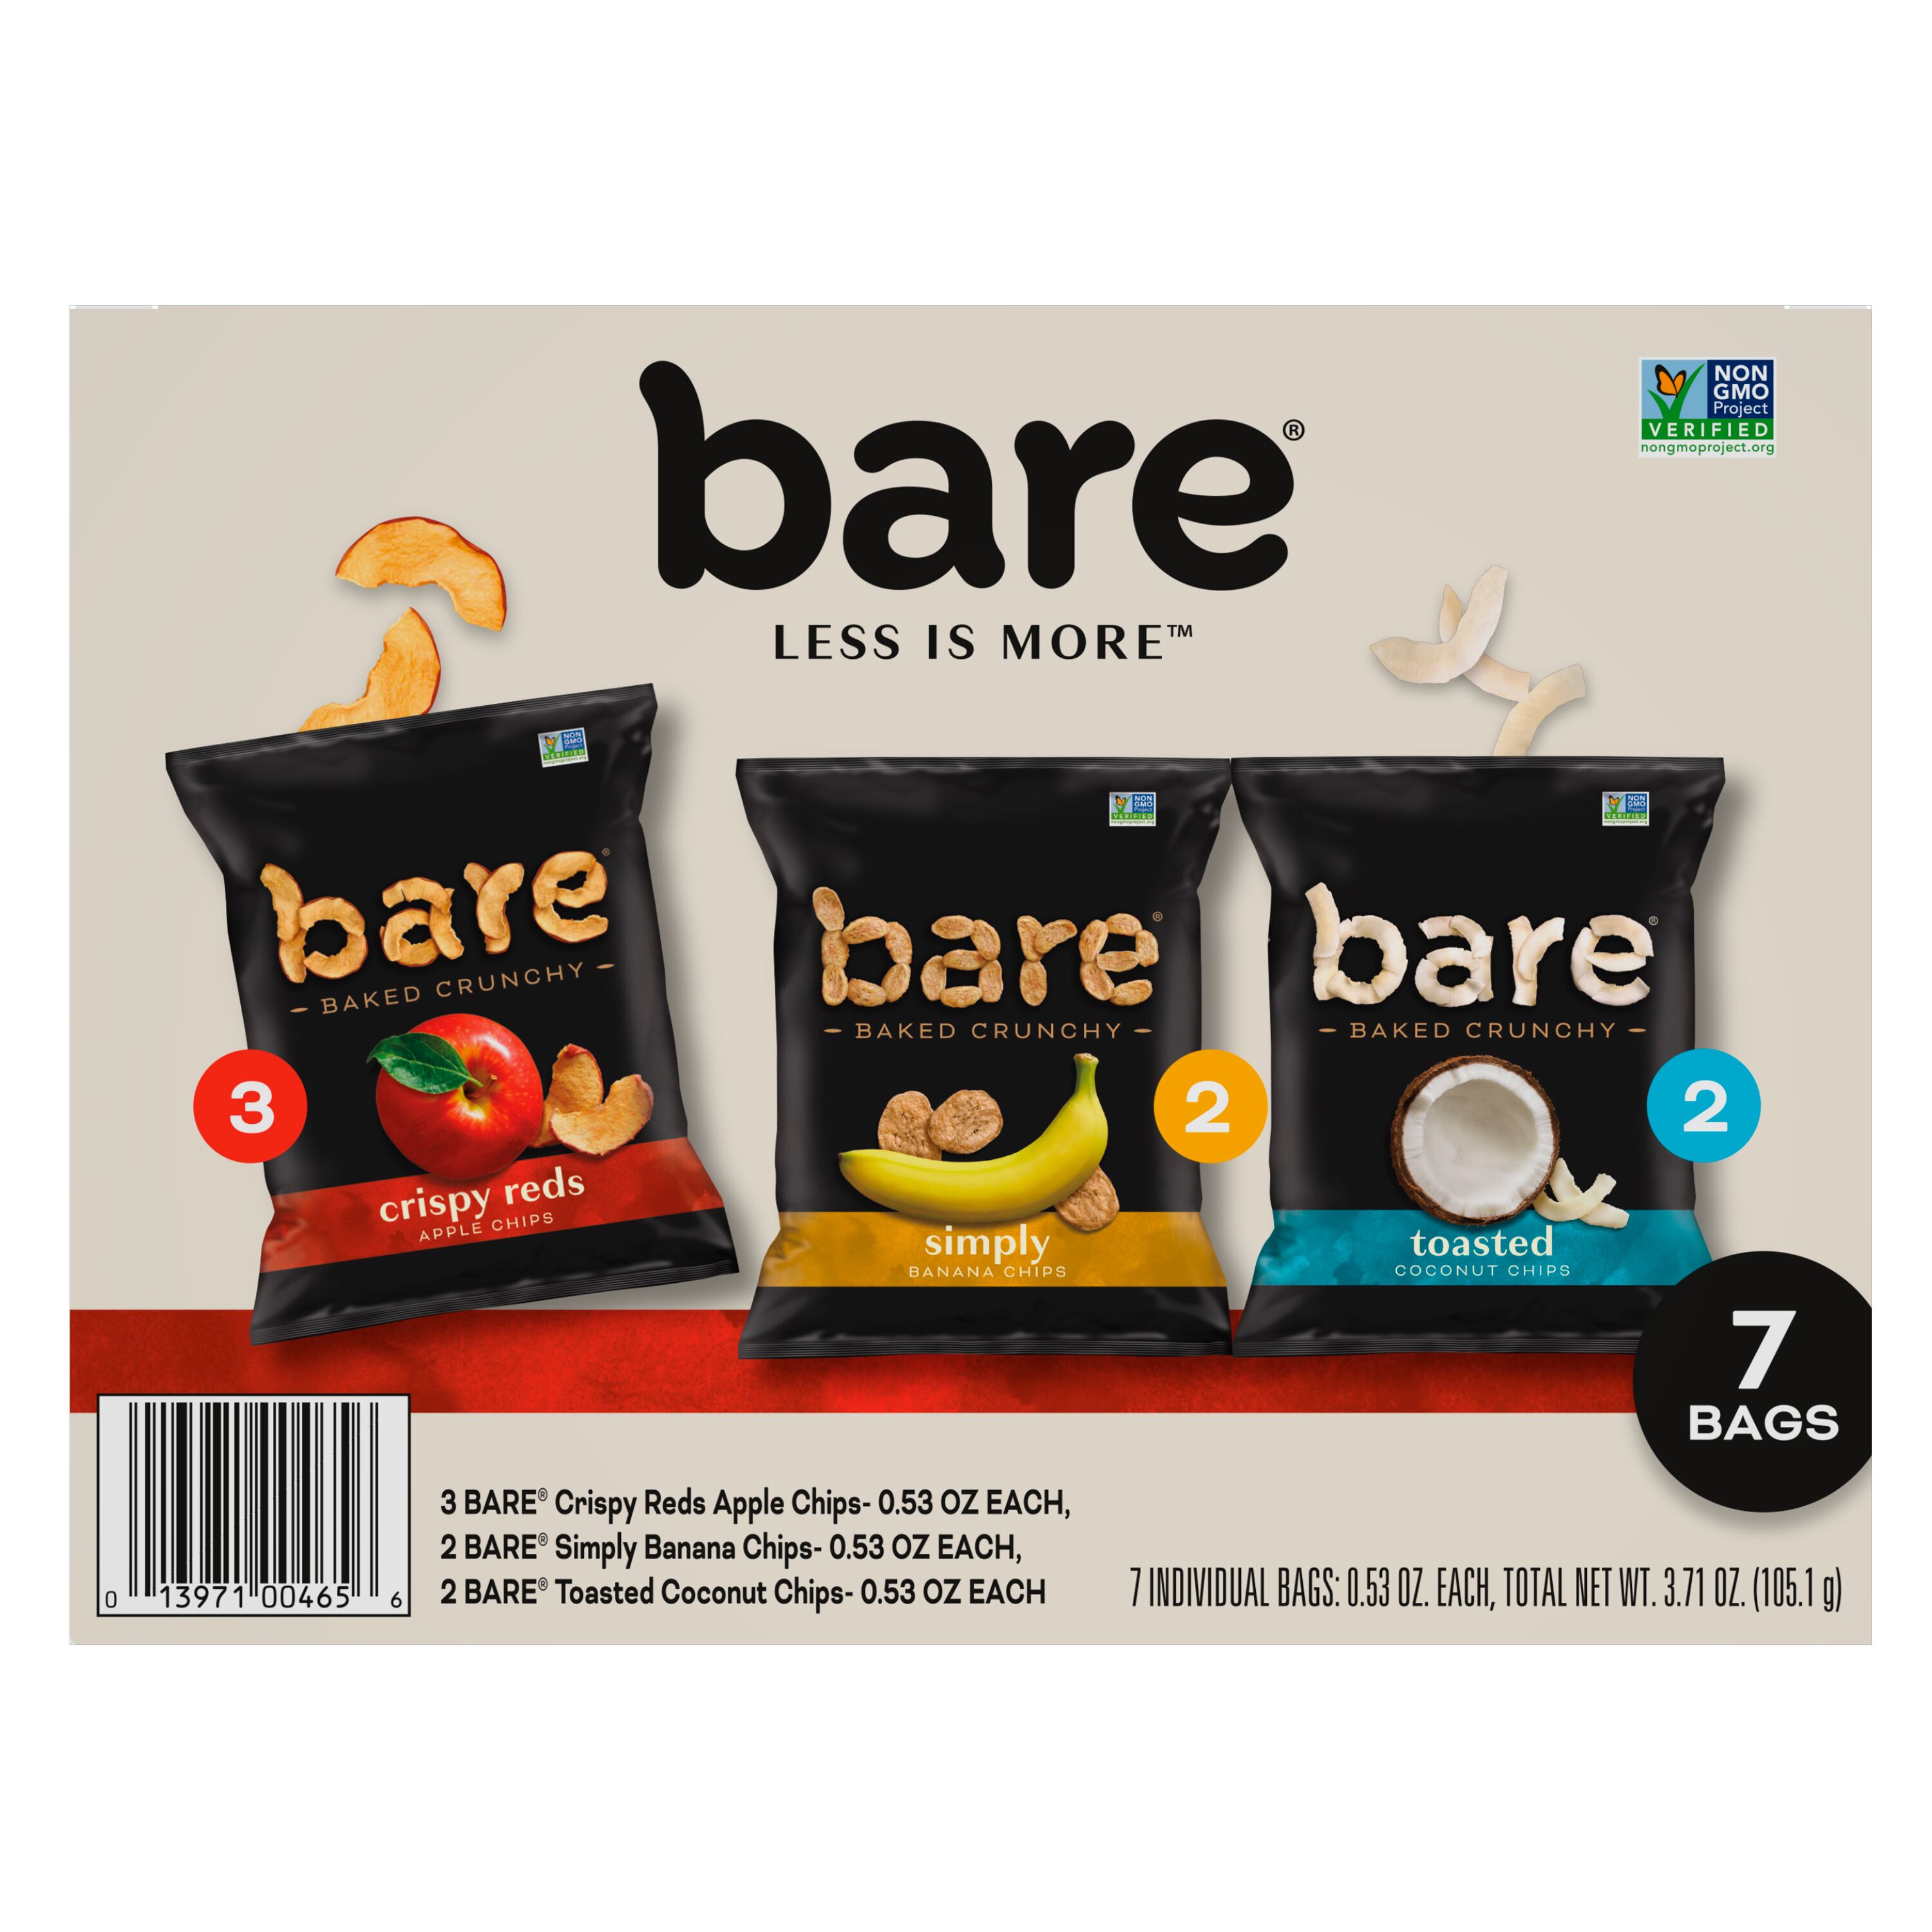 Bare, Baked Crunchy Fruit Chips Snack Pack, 0.53 oz Bags, 7 Count - image 4 of 12